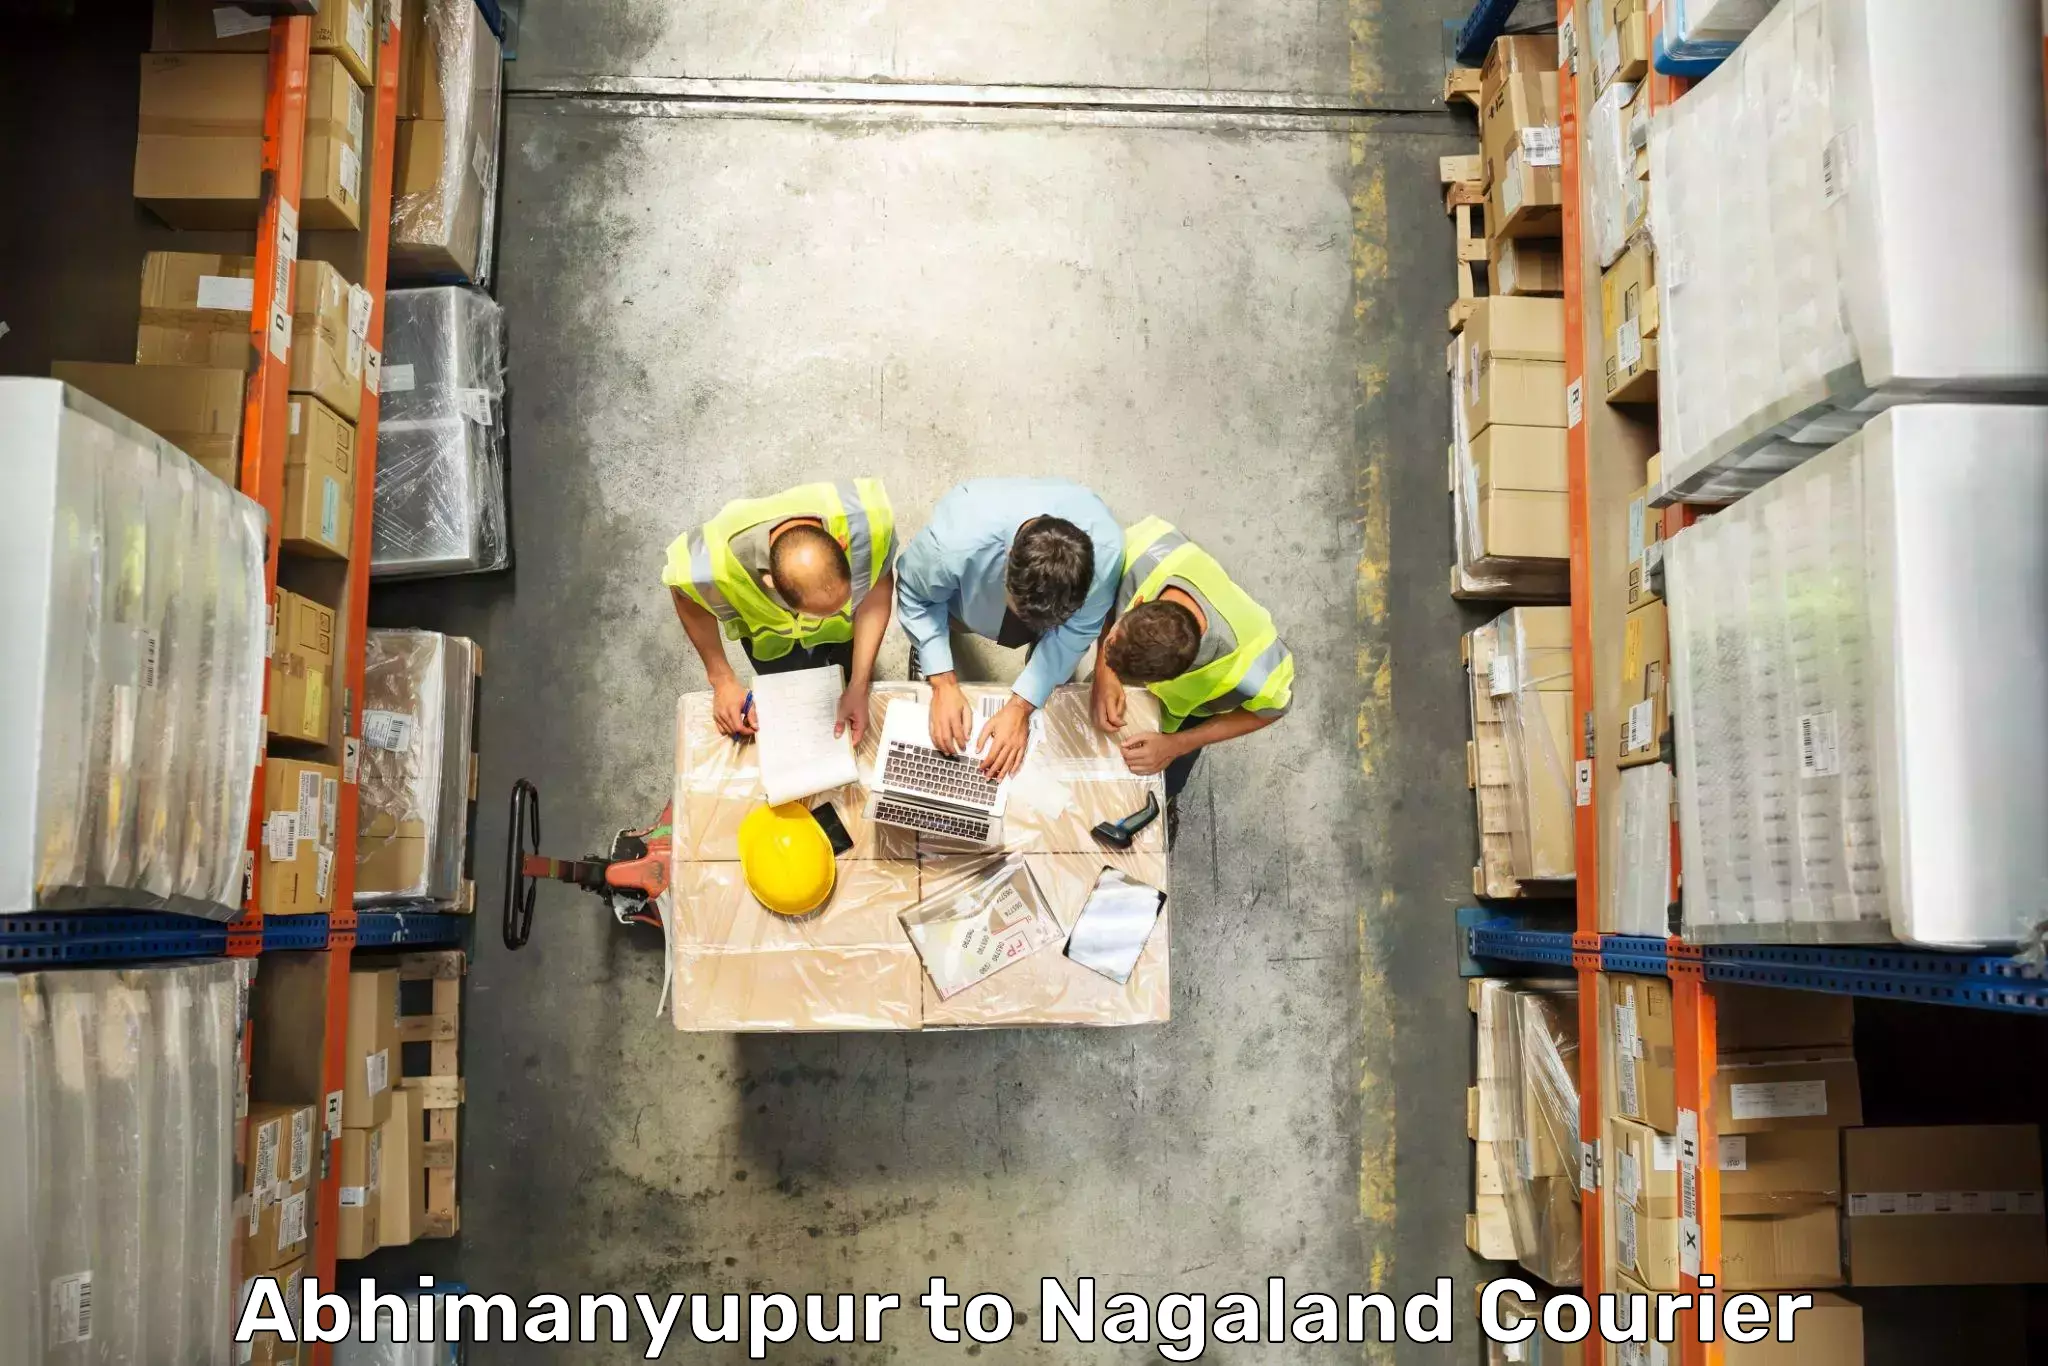 Luggage transport consultancy Abhimanyupur to Nagaland